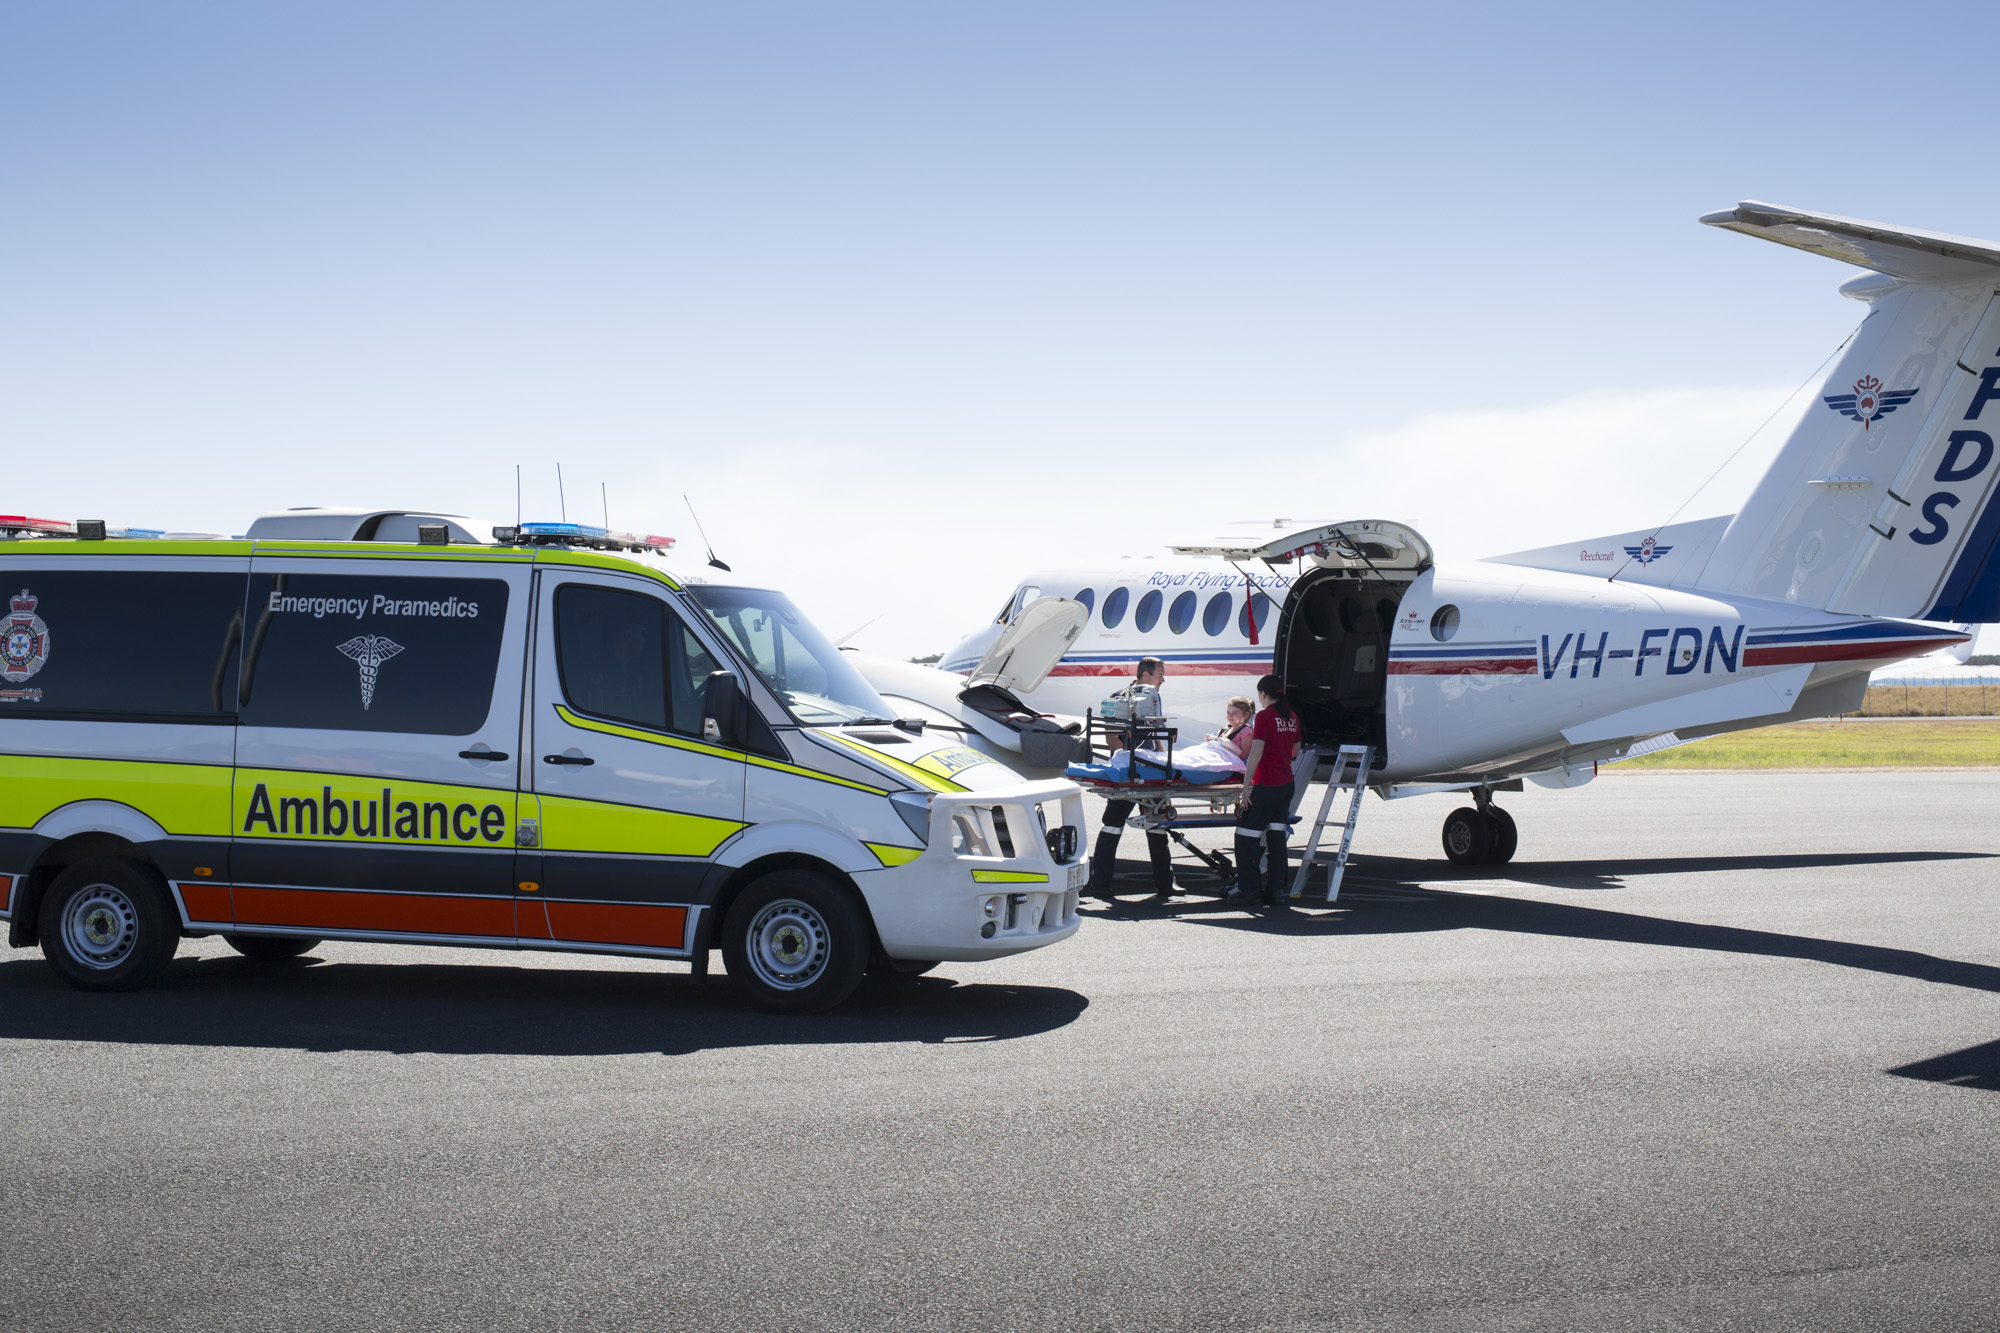  The Royal Flying Doctor Service, Qld, Australia. 